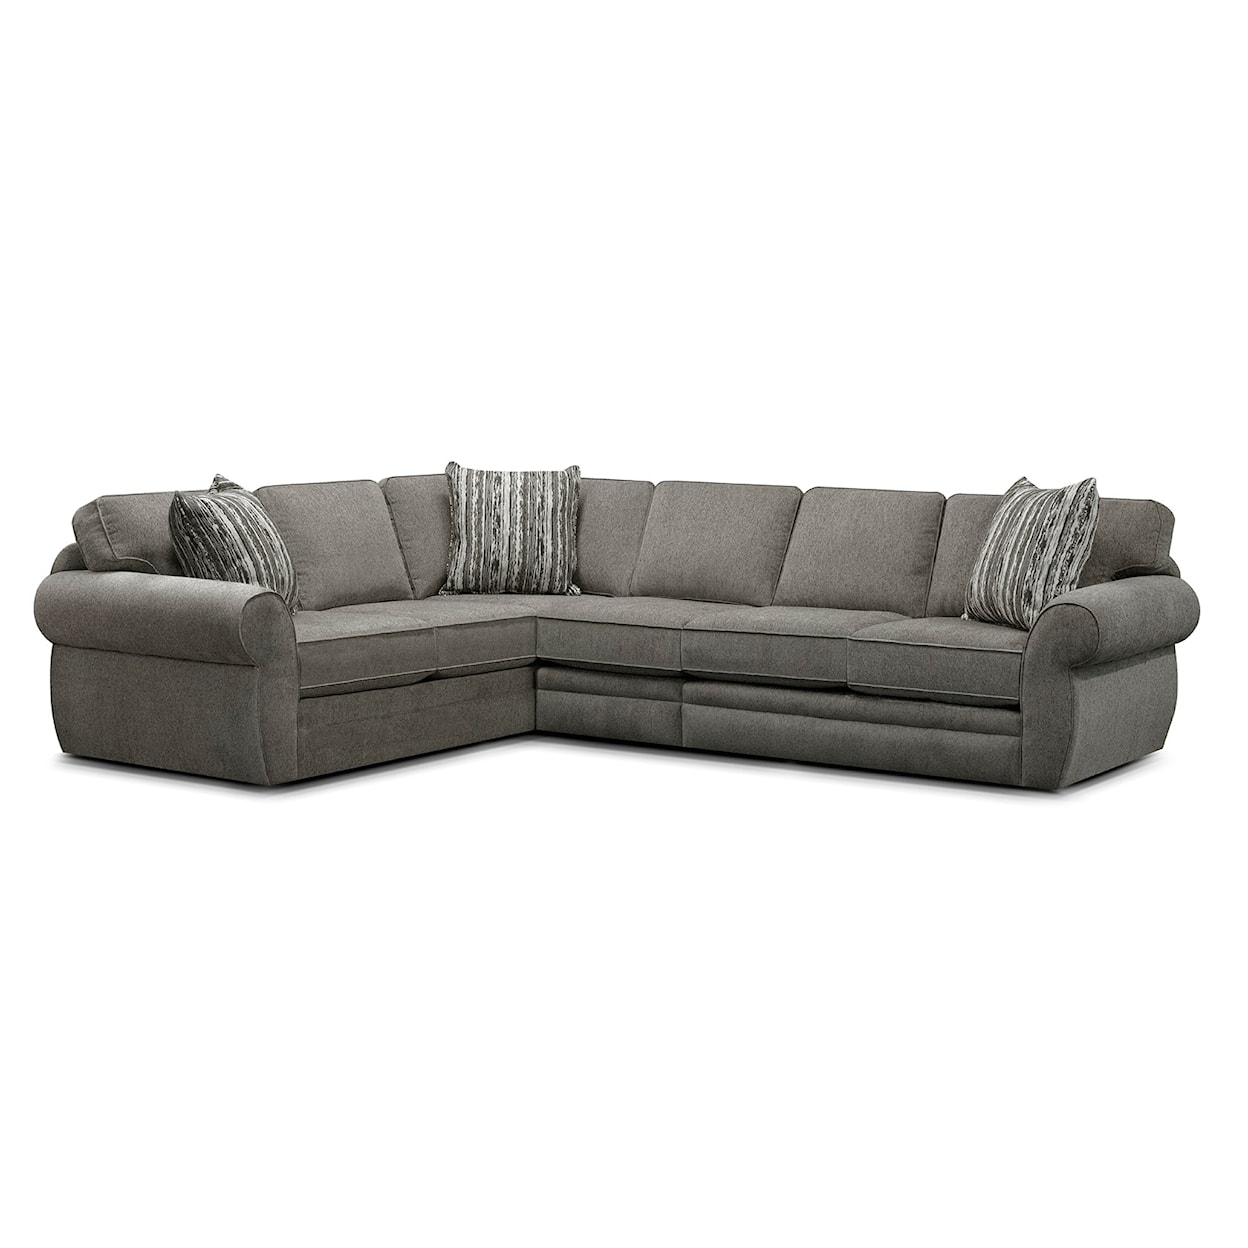 Dimensions 5S00 Series 3-Piece Sectional